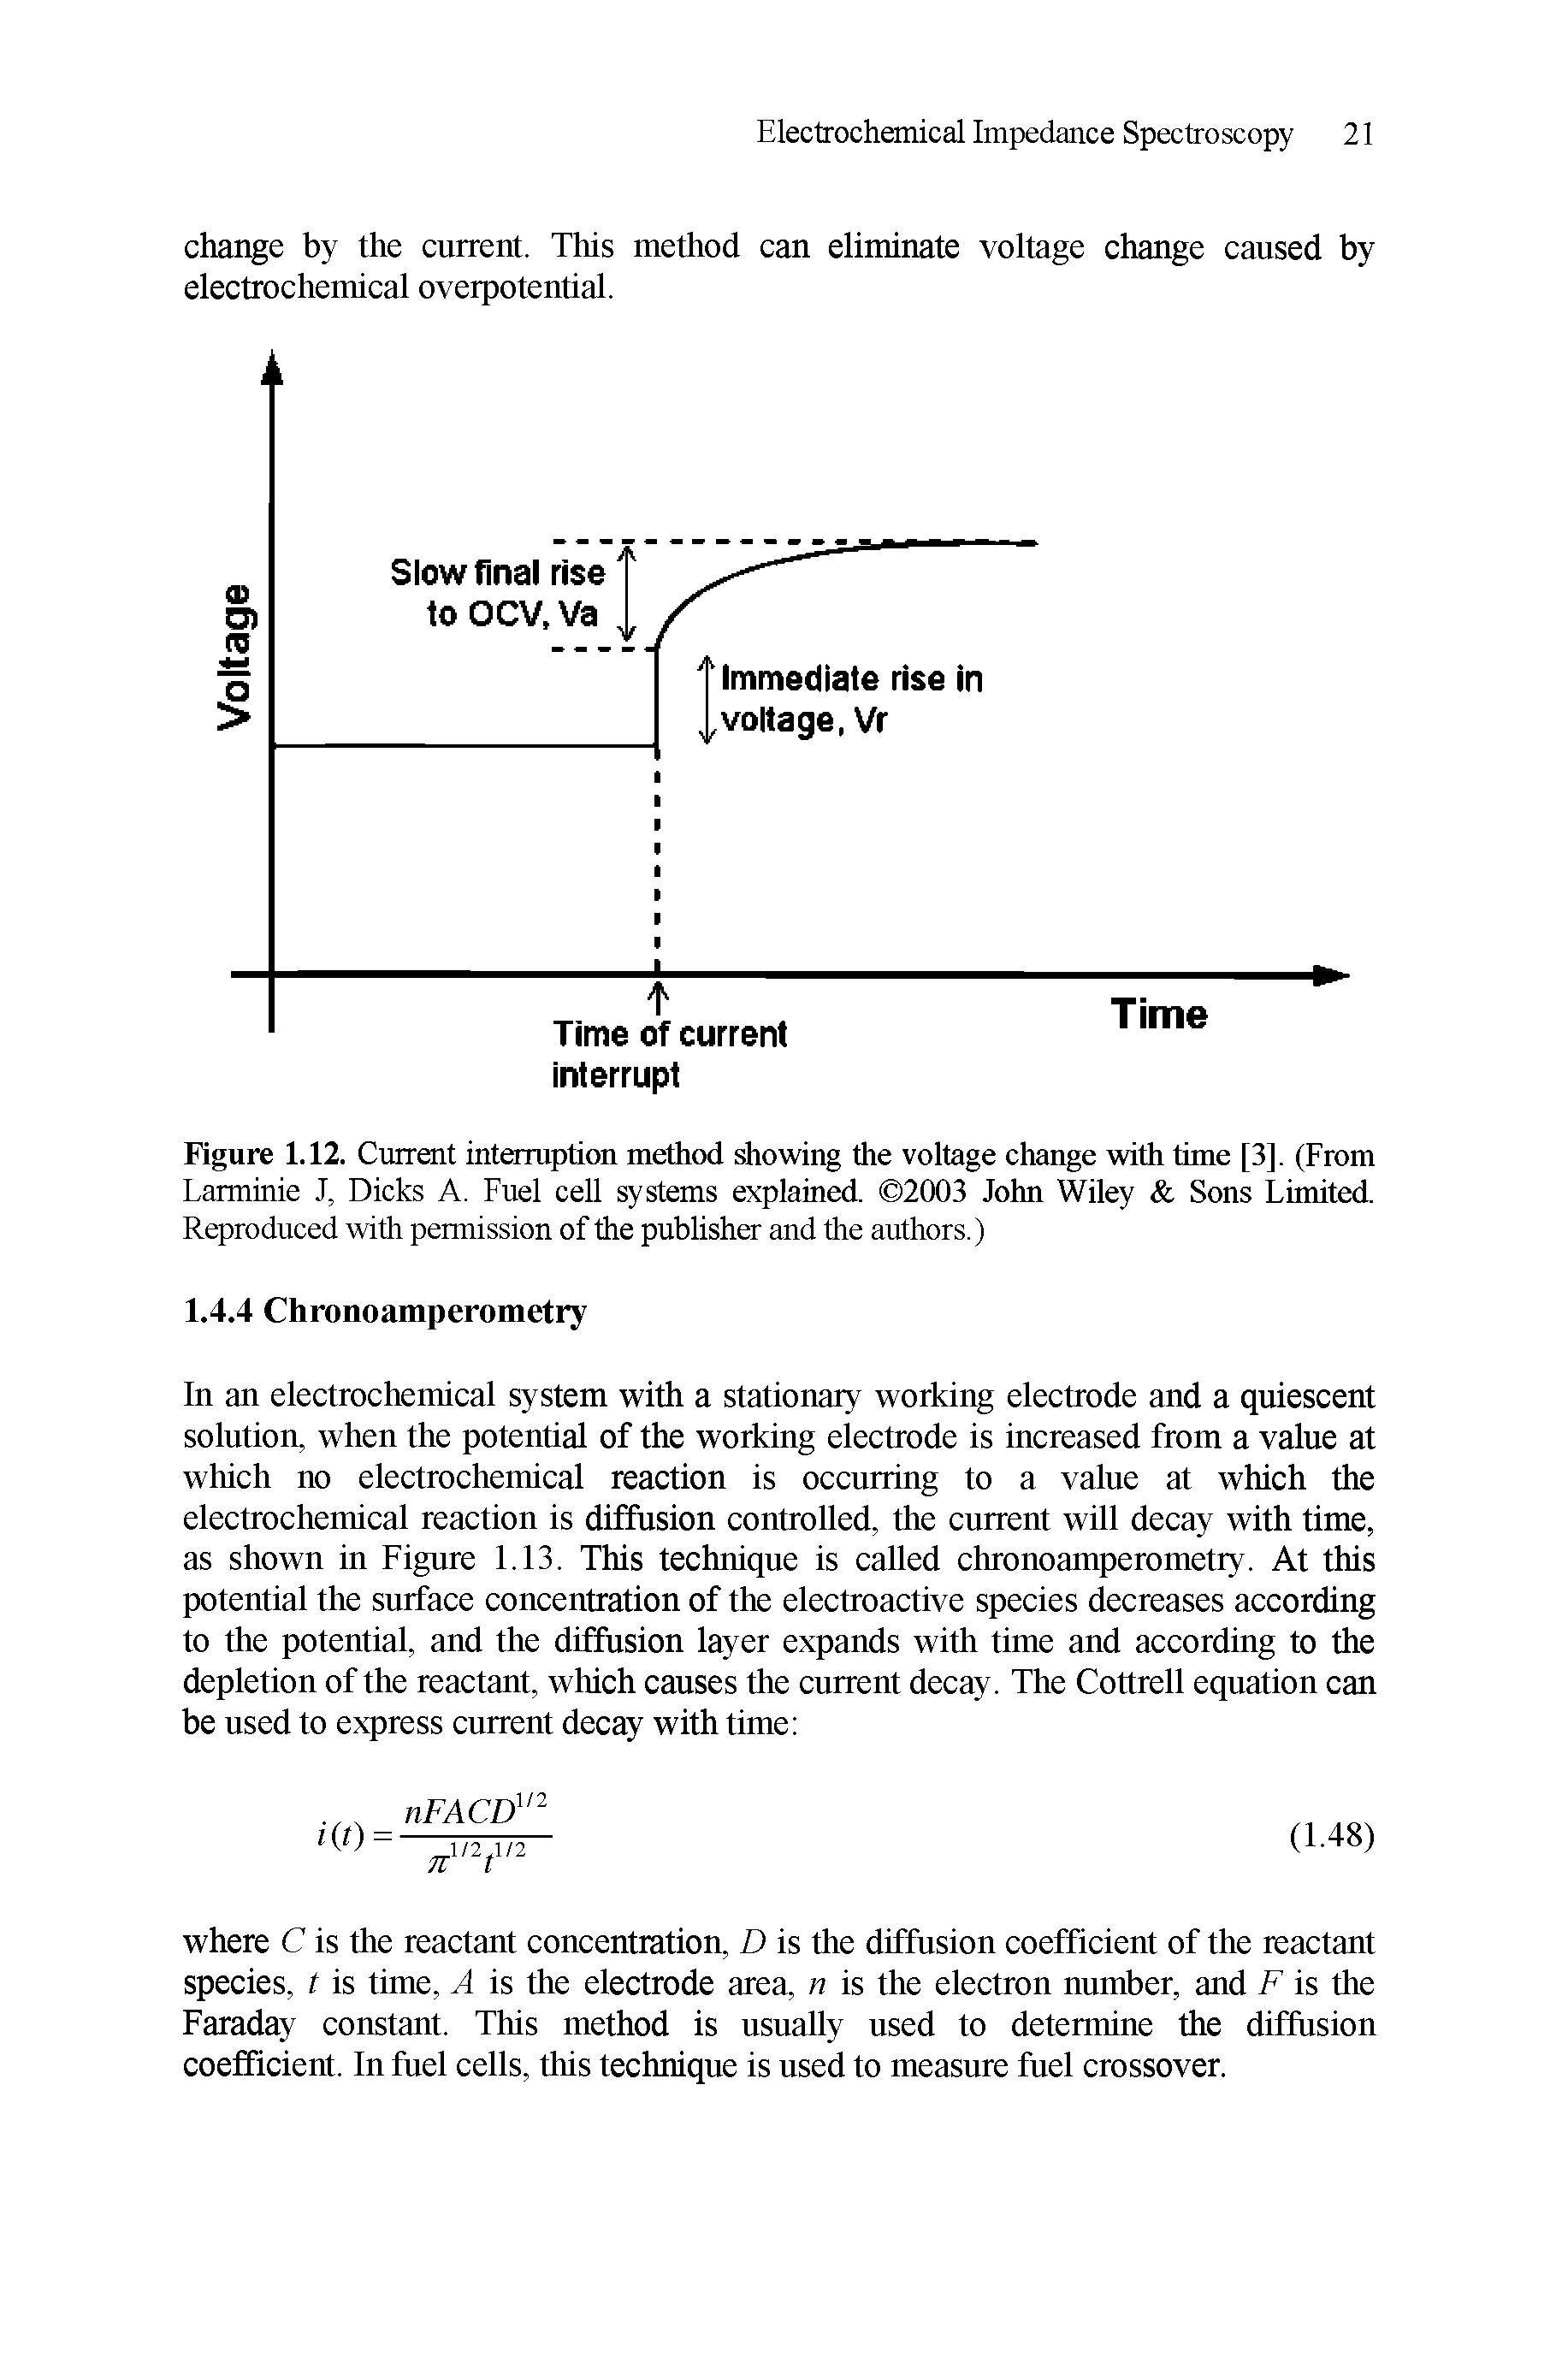 Figure 1.12. Current interruption method showing the voltage change with time [3], (From Larminie J, Dicks A. Fuel cell systems explained. 2003 John Wiley Sons Limited. Reproduced with permission of the publisher and the authors.)...